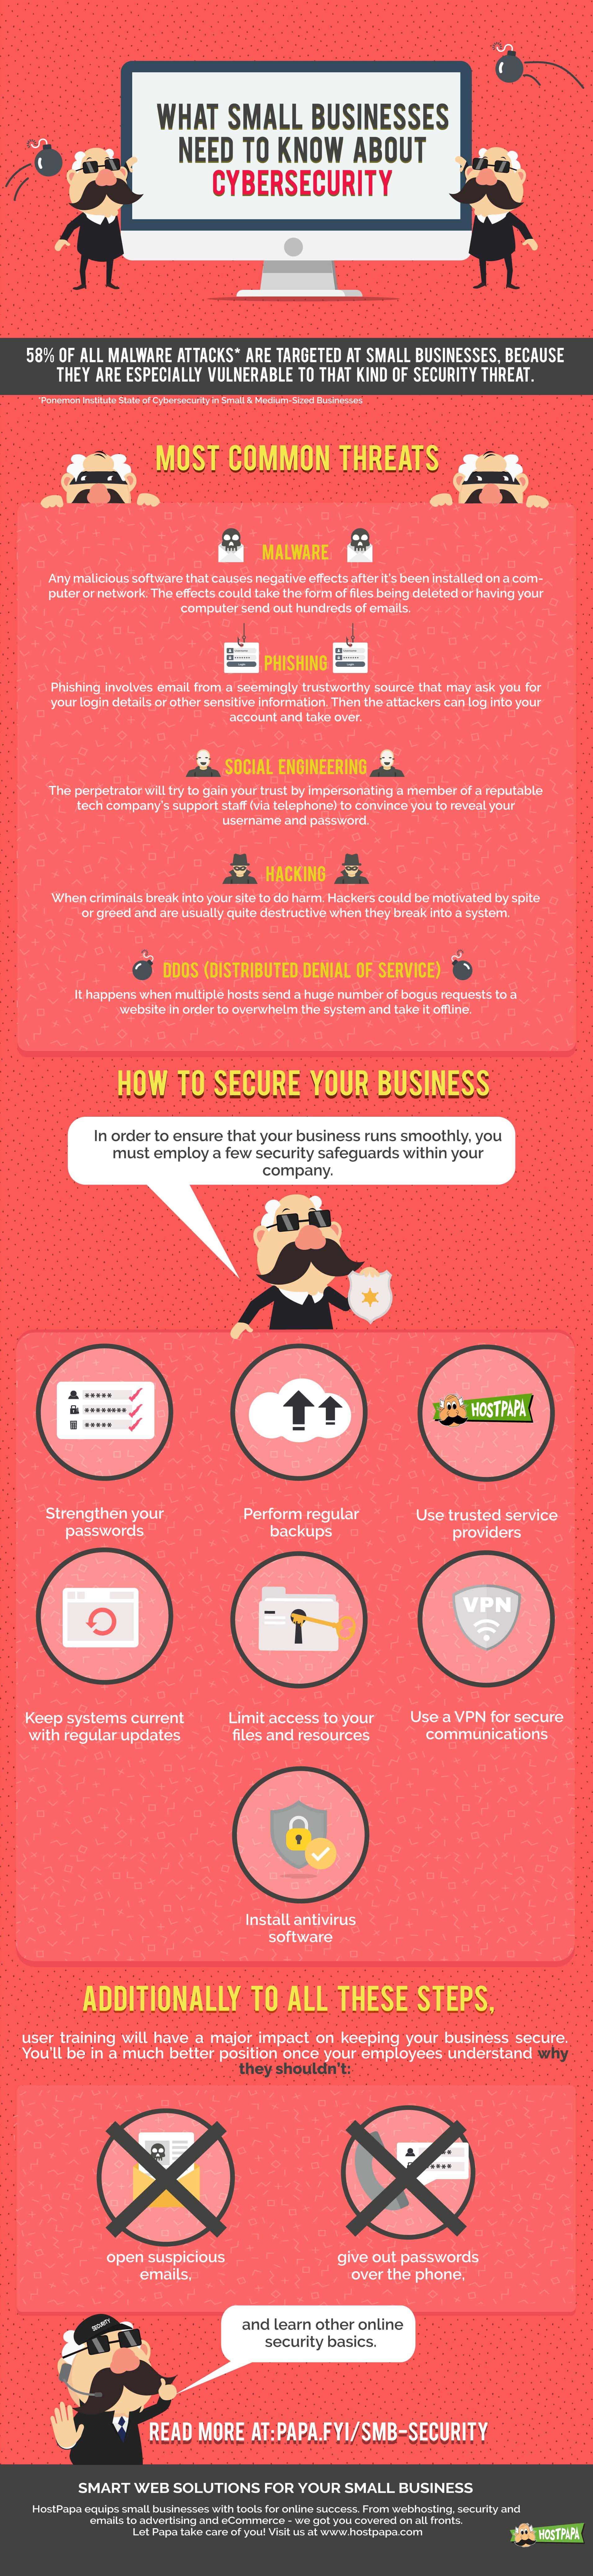 Infographic: cybersecurity for smb